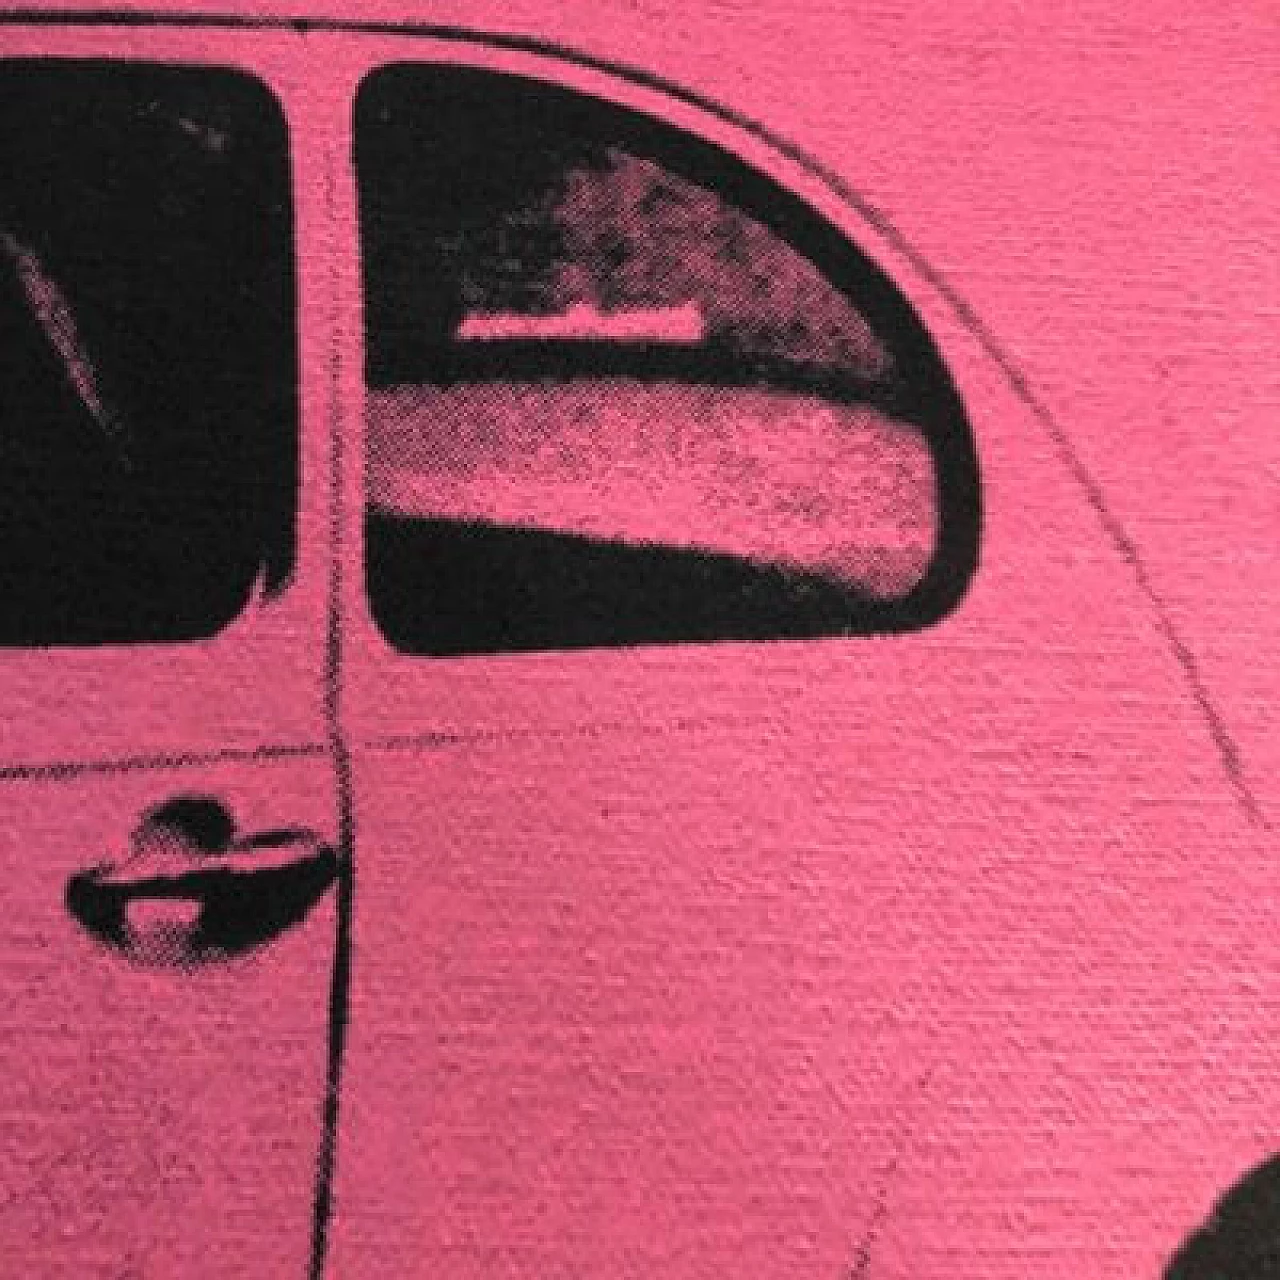 Andy Warhol, Volkswagen, lithograph, 1980s 5